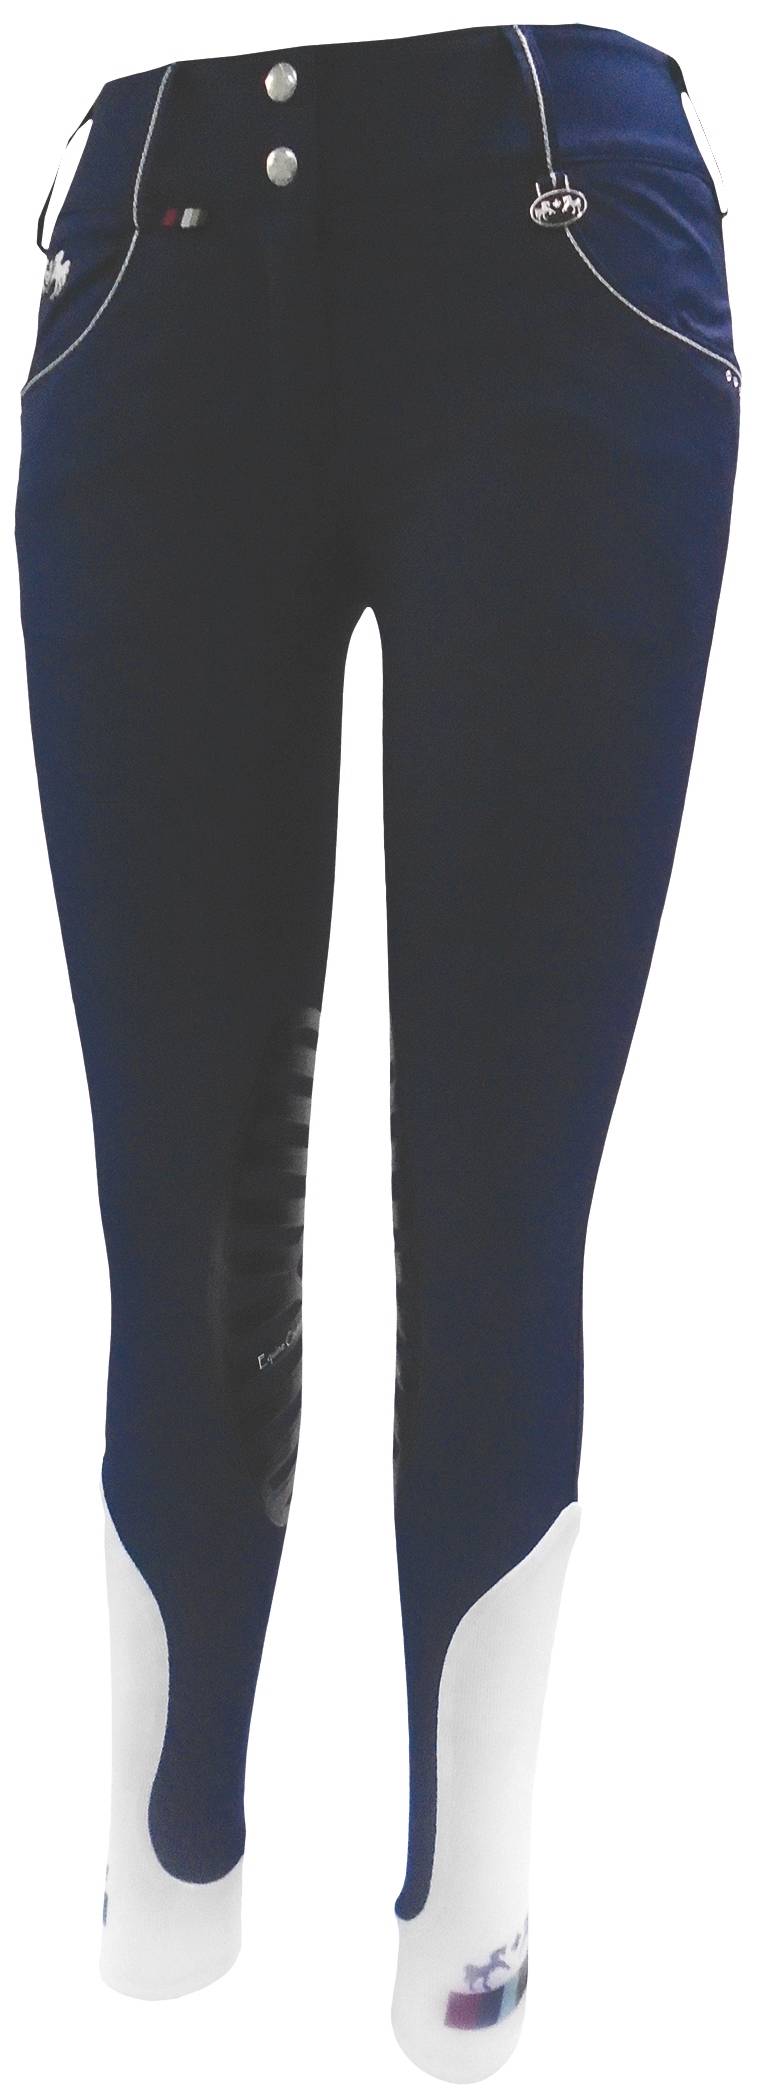 Equine Couture Darsy Knee Patch Breeches -Ladies